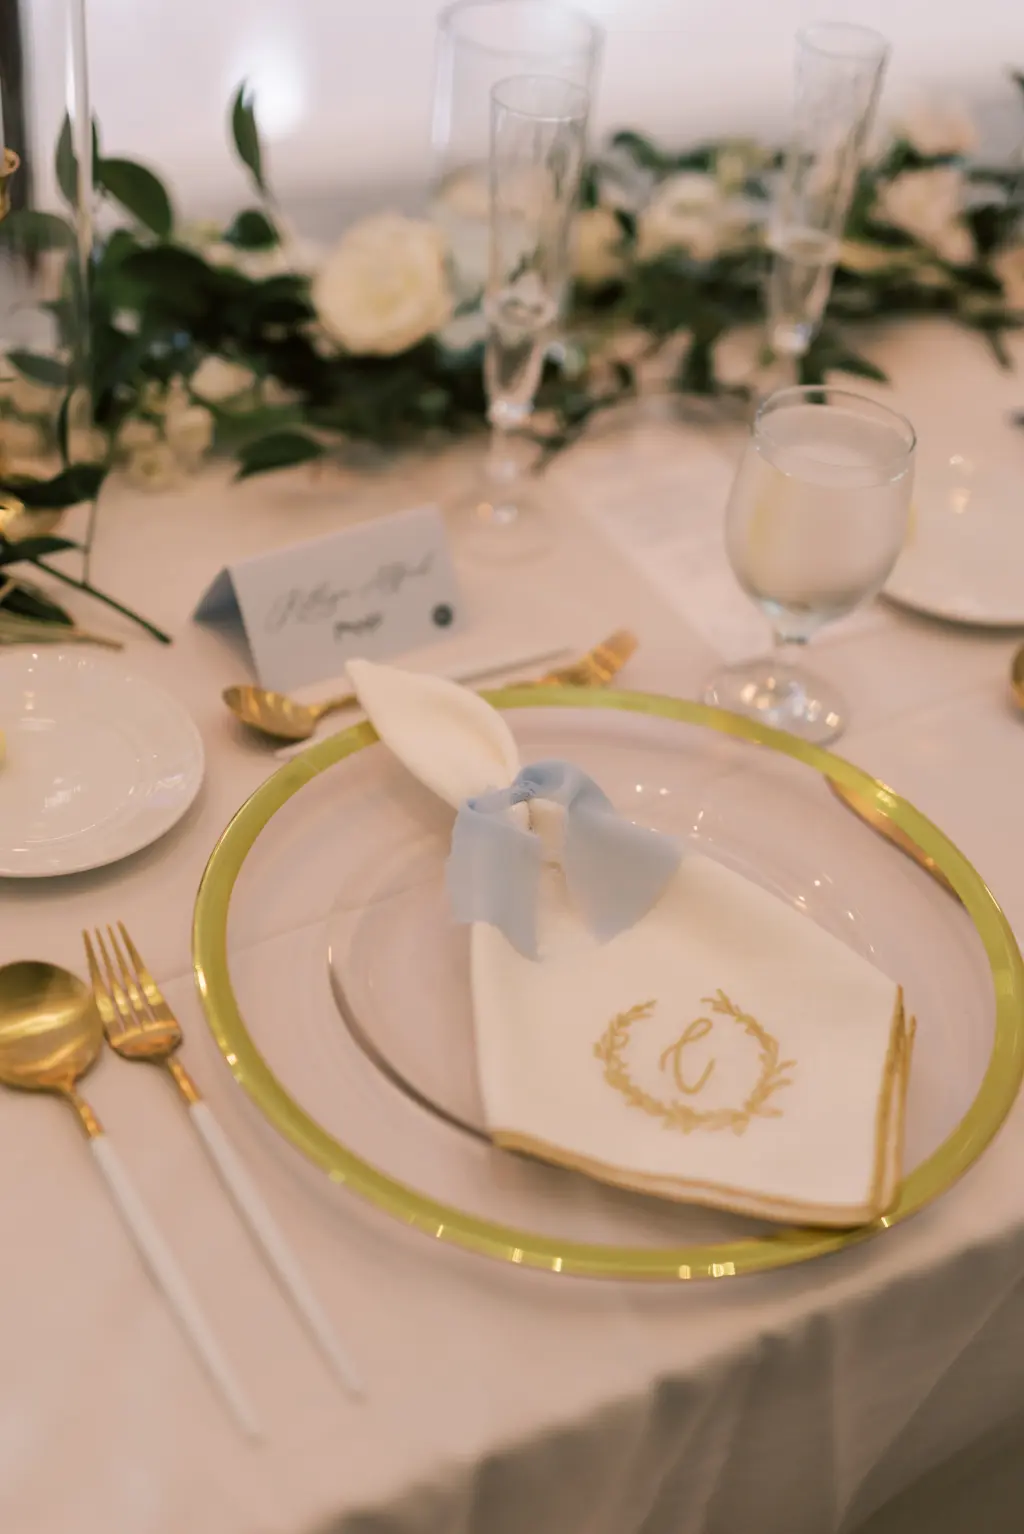 Classic White and Gold Embroidered Monogrammed Napkins with Gold Charger and Flatware | Wedding Tablescape Ideas